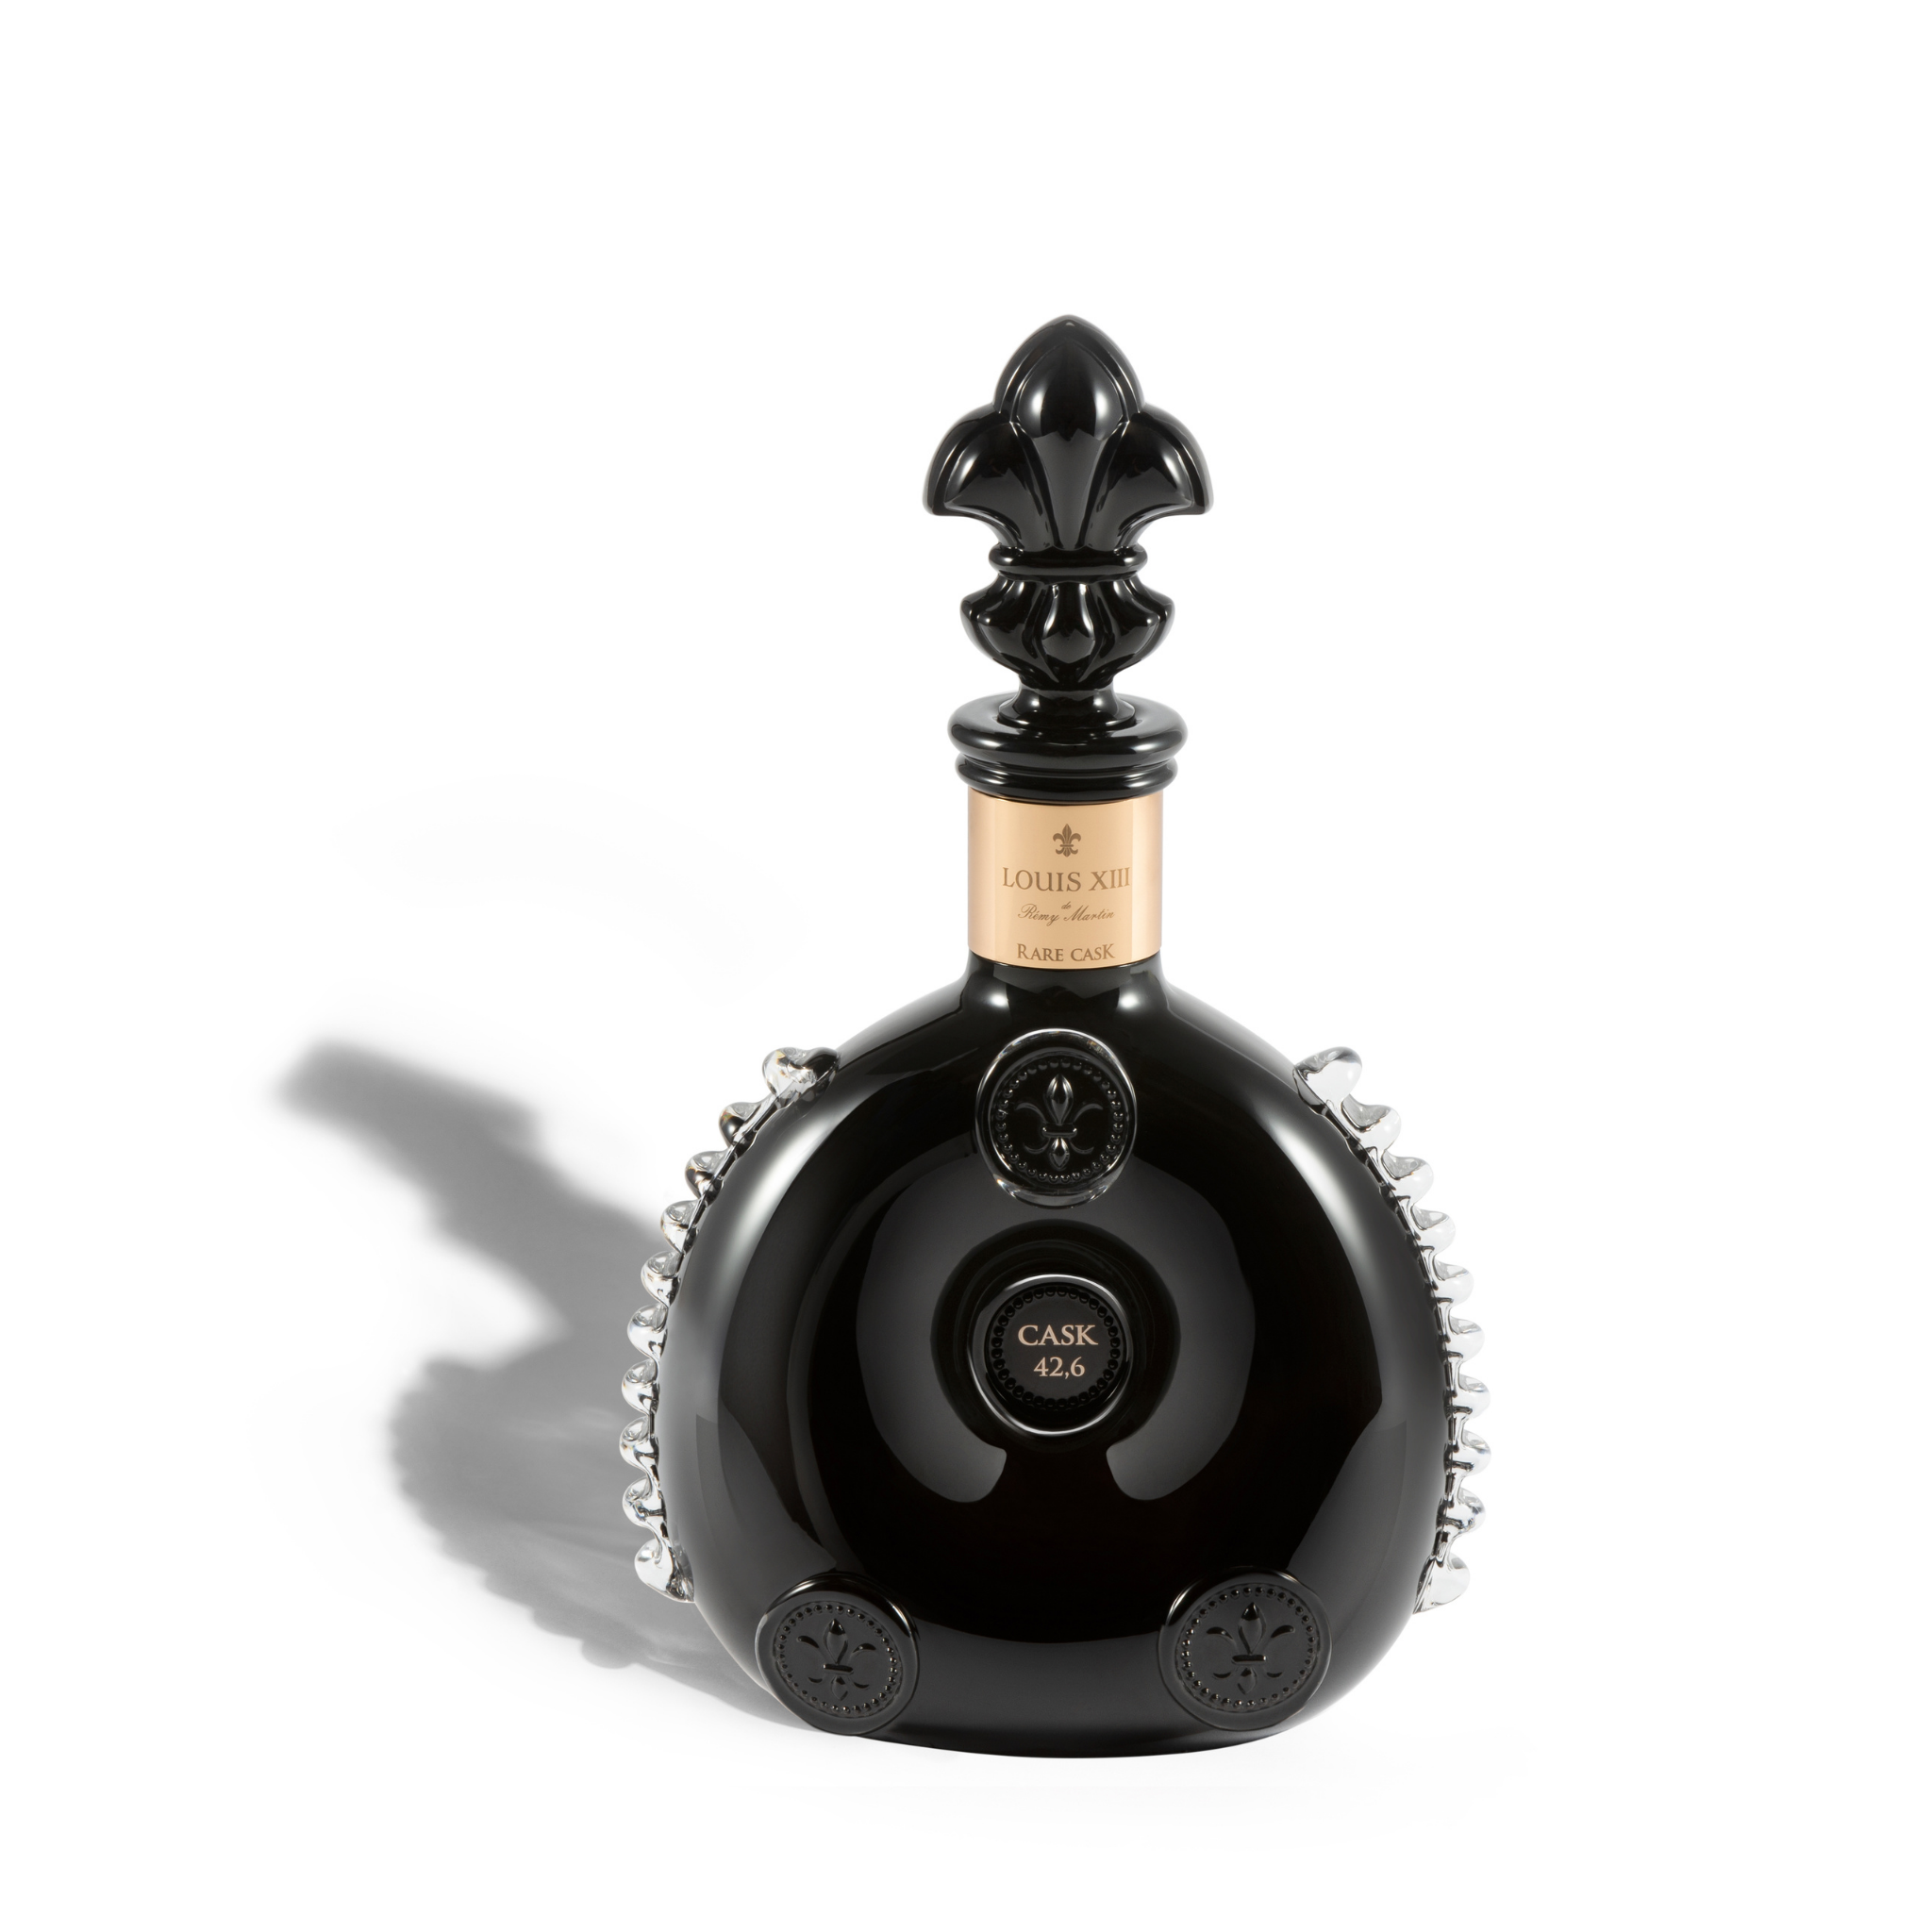 LOUIS XIII Rare Cask 42.6 - Limited Editions